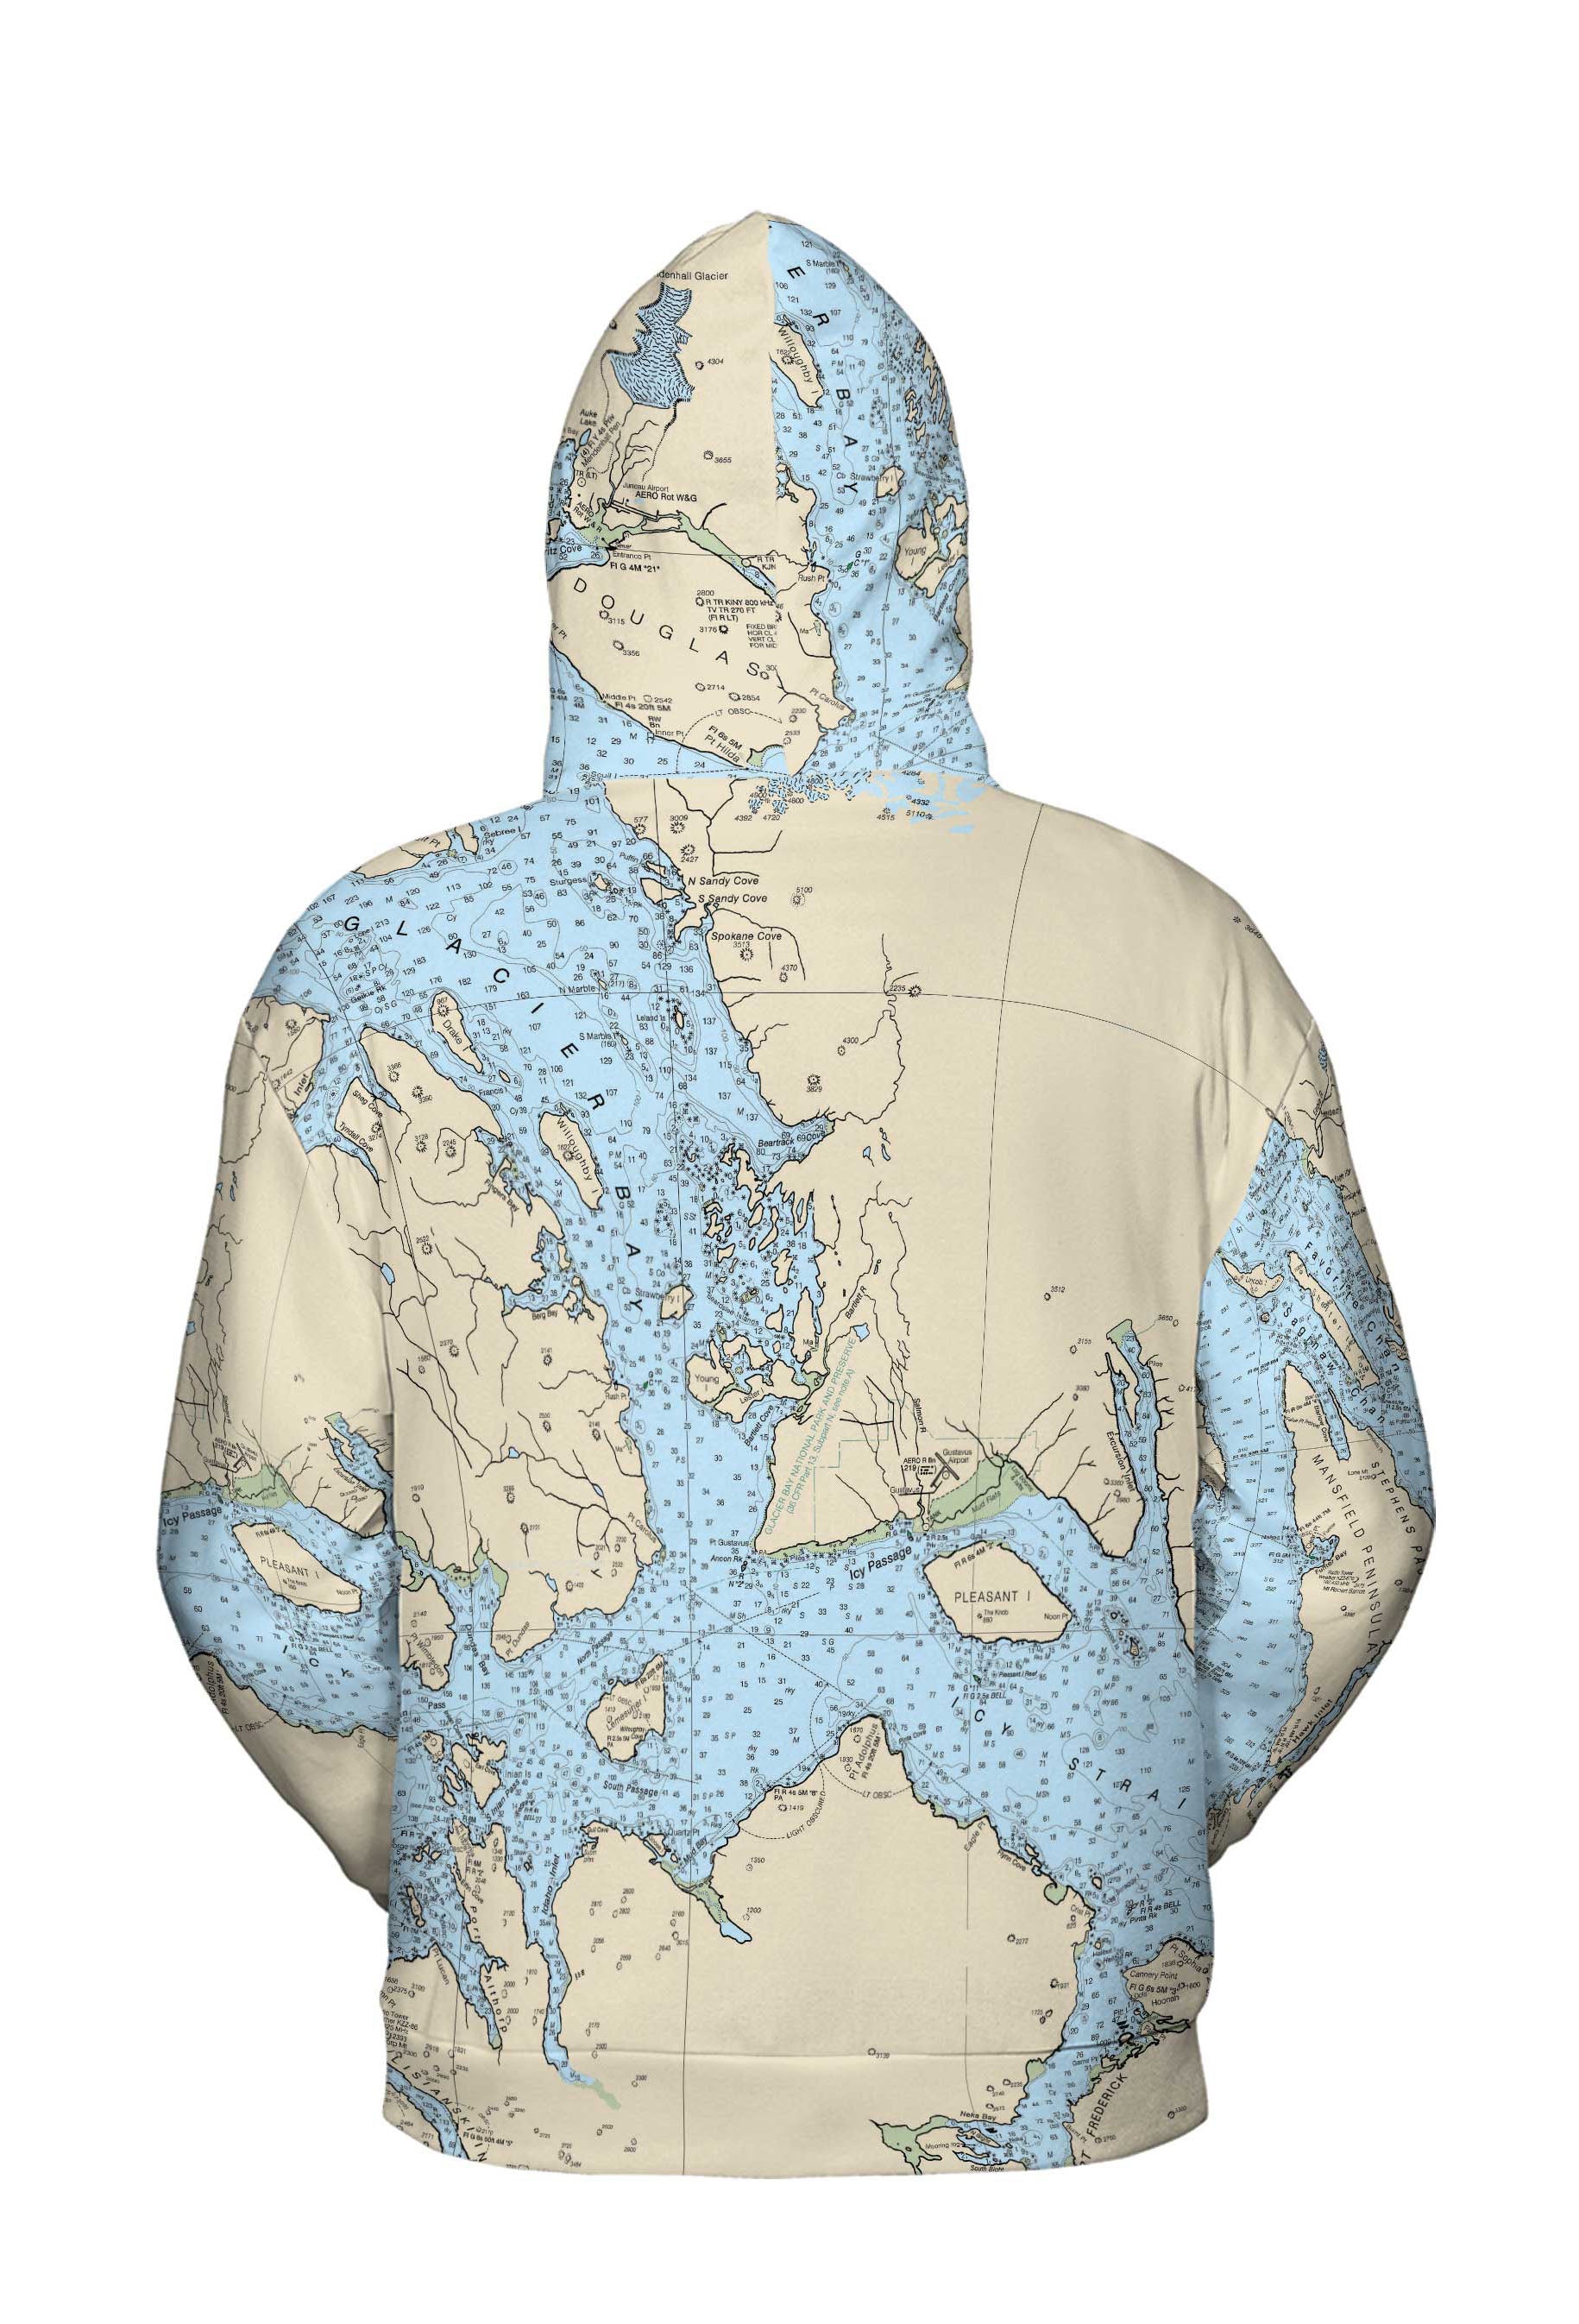 The Juneau and Glacier Bay Lightweight Hoodie